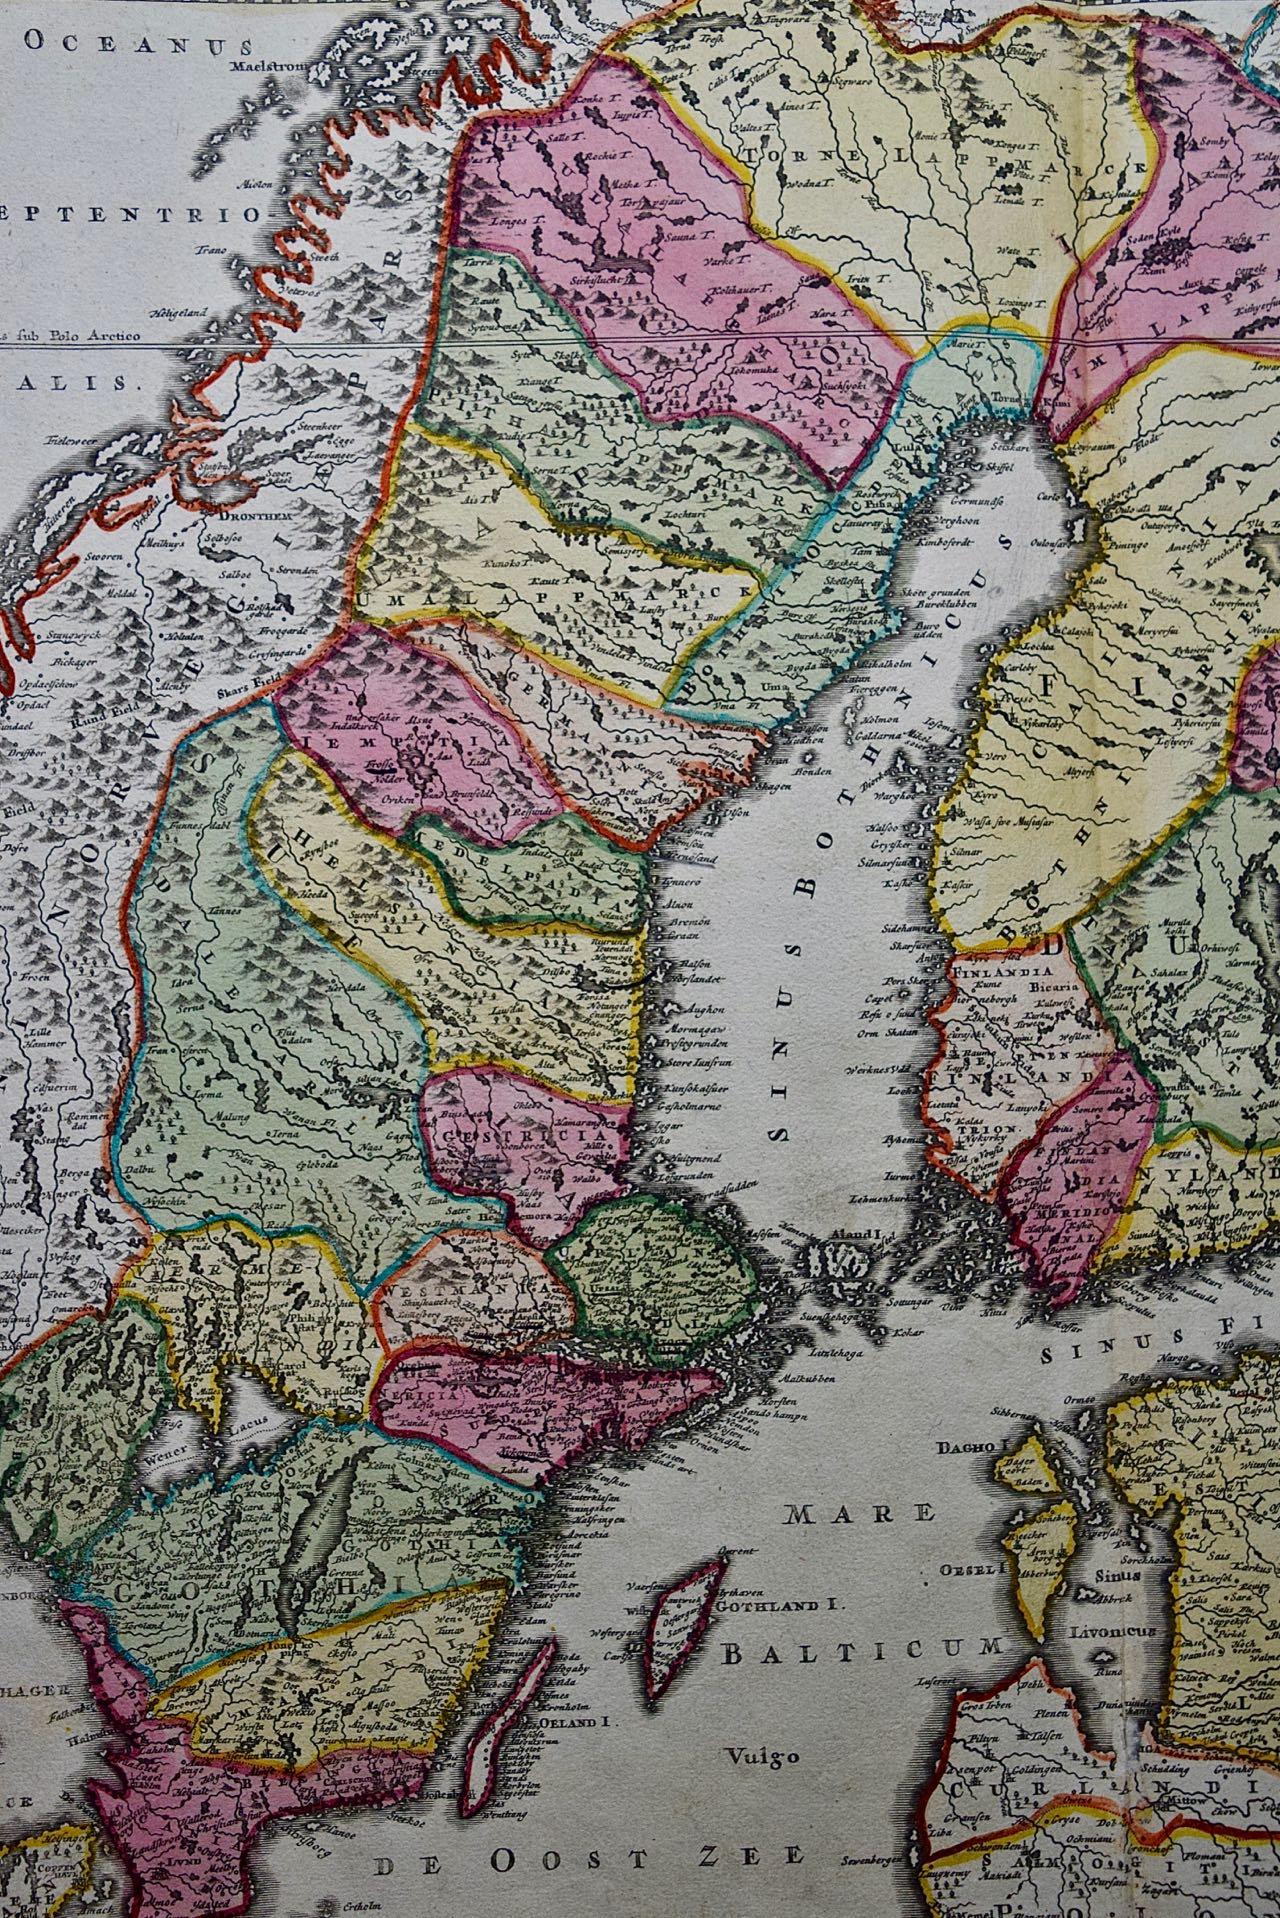 Engraved Sweden & Adjacent Portions of Scandinavia: A Hand-Colored 18th C. Map by Homann For Sale